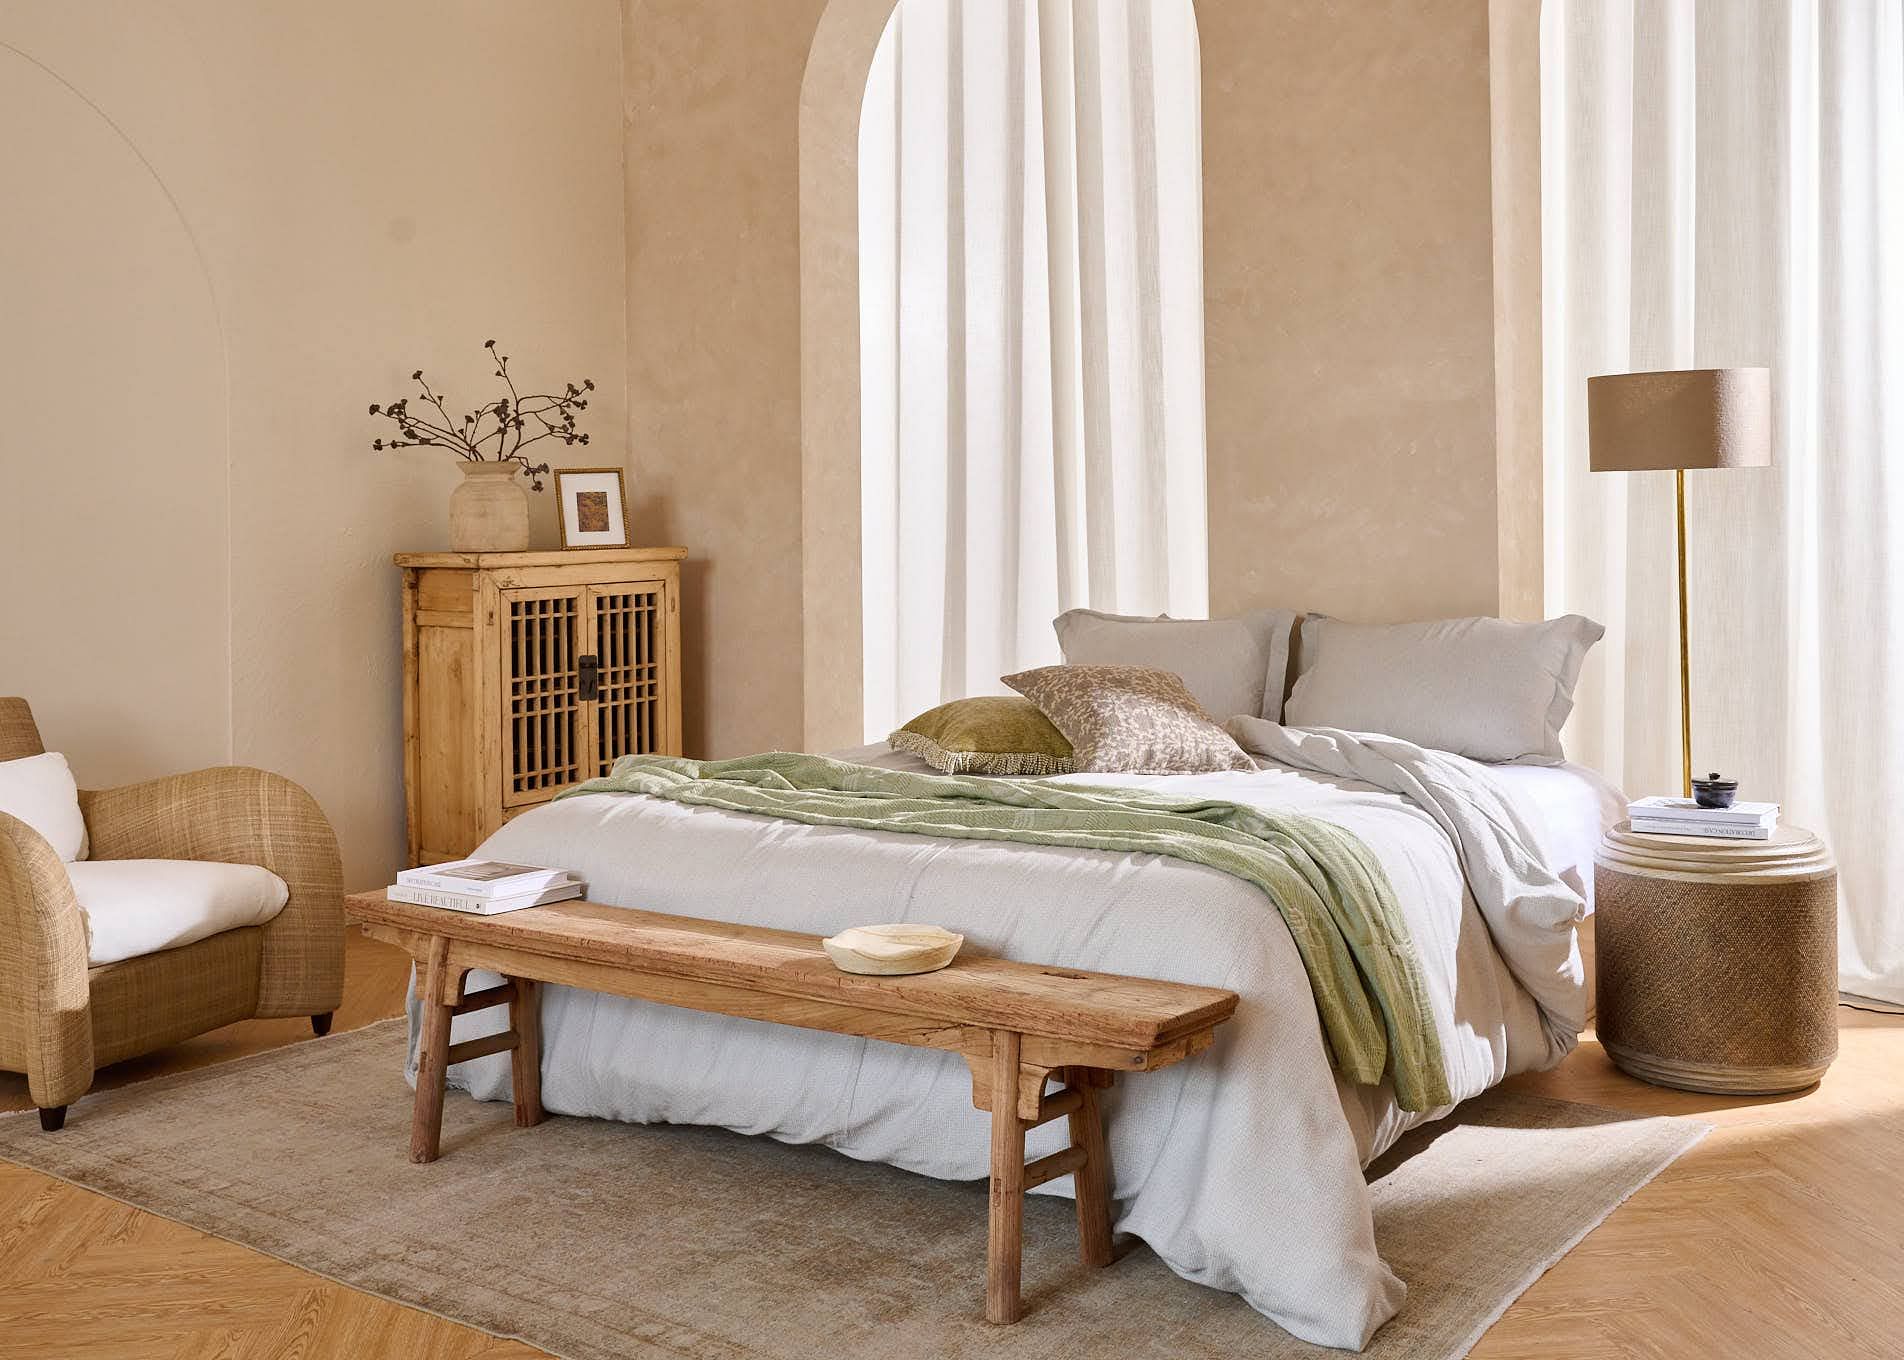 A bed is made up with bed linens. A wooden bench stands to the front, with a standing lamp and side table to one side. 